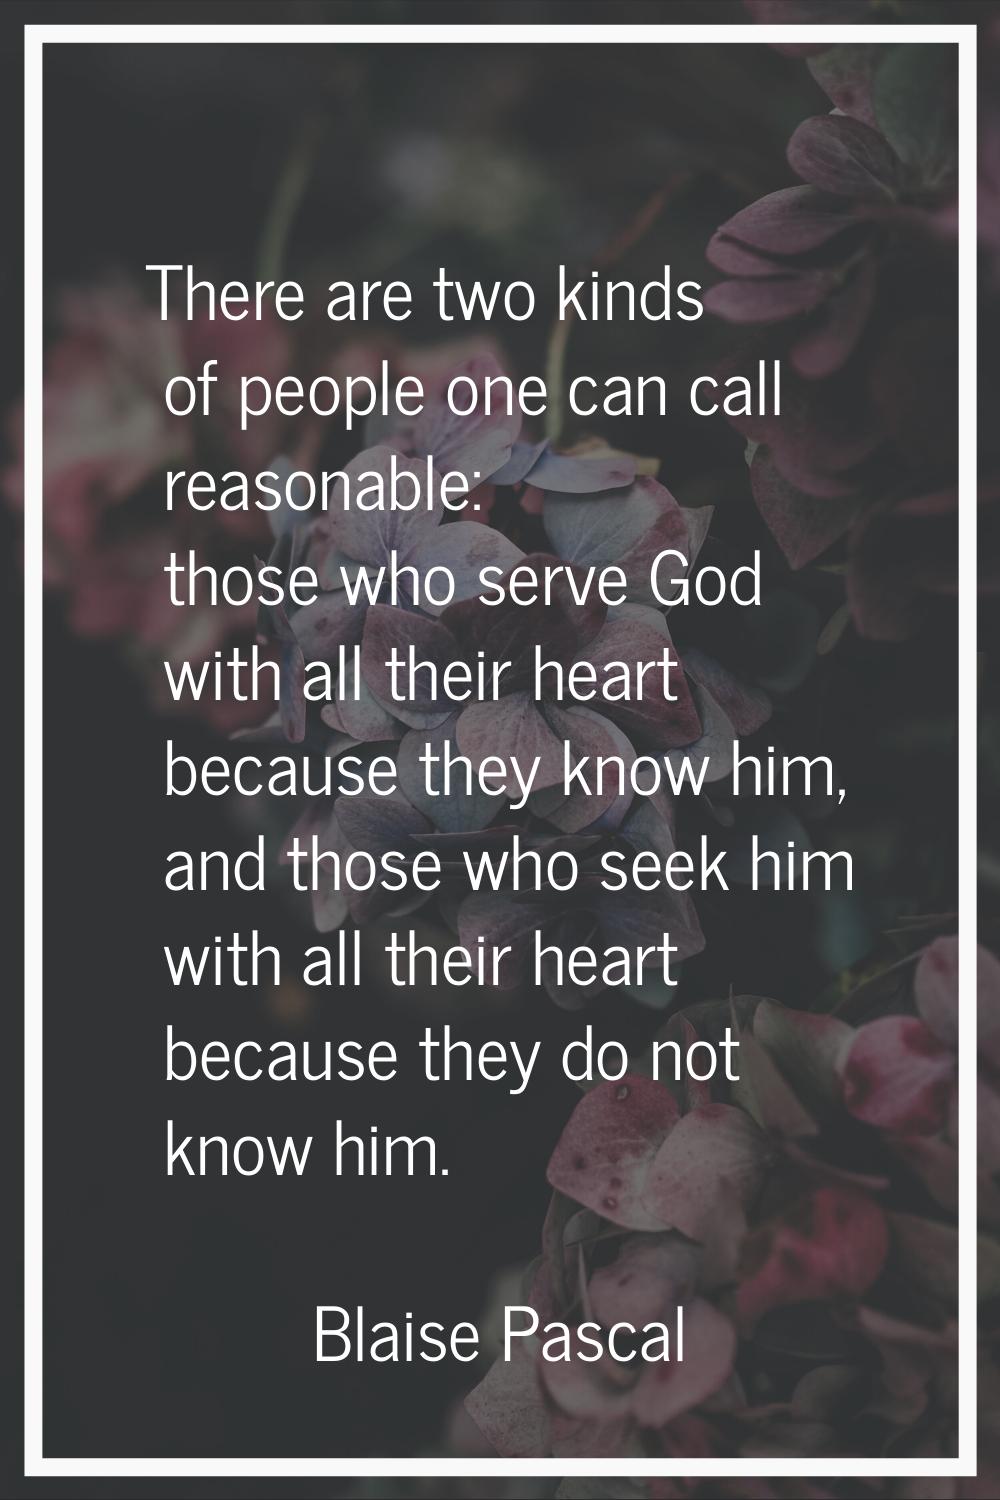 There are two kinds of people one can call reasonable: those who serve God with all their heart bec